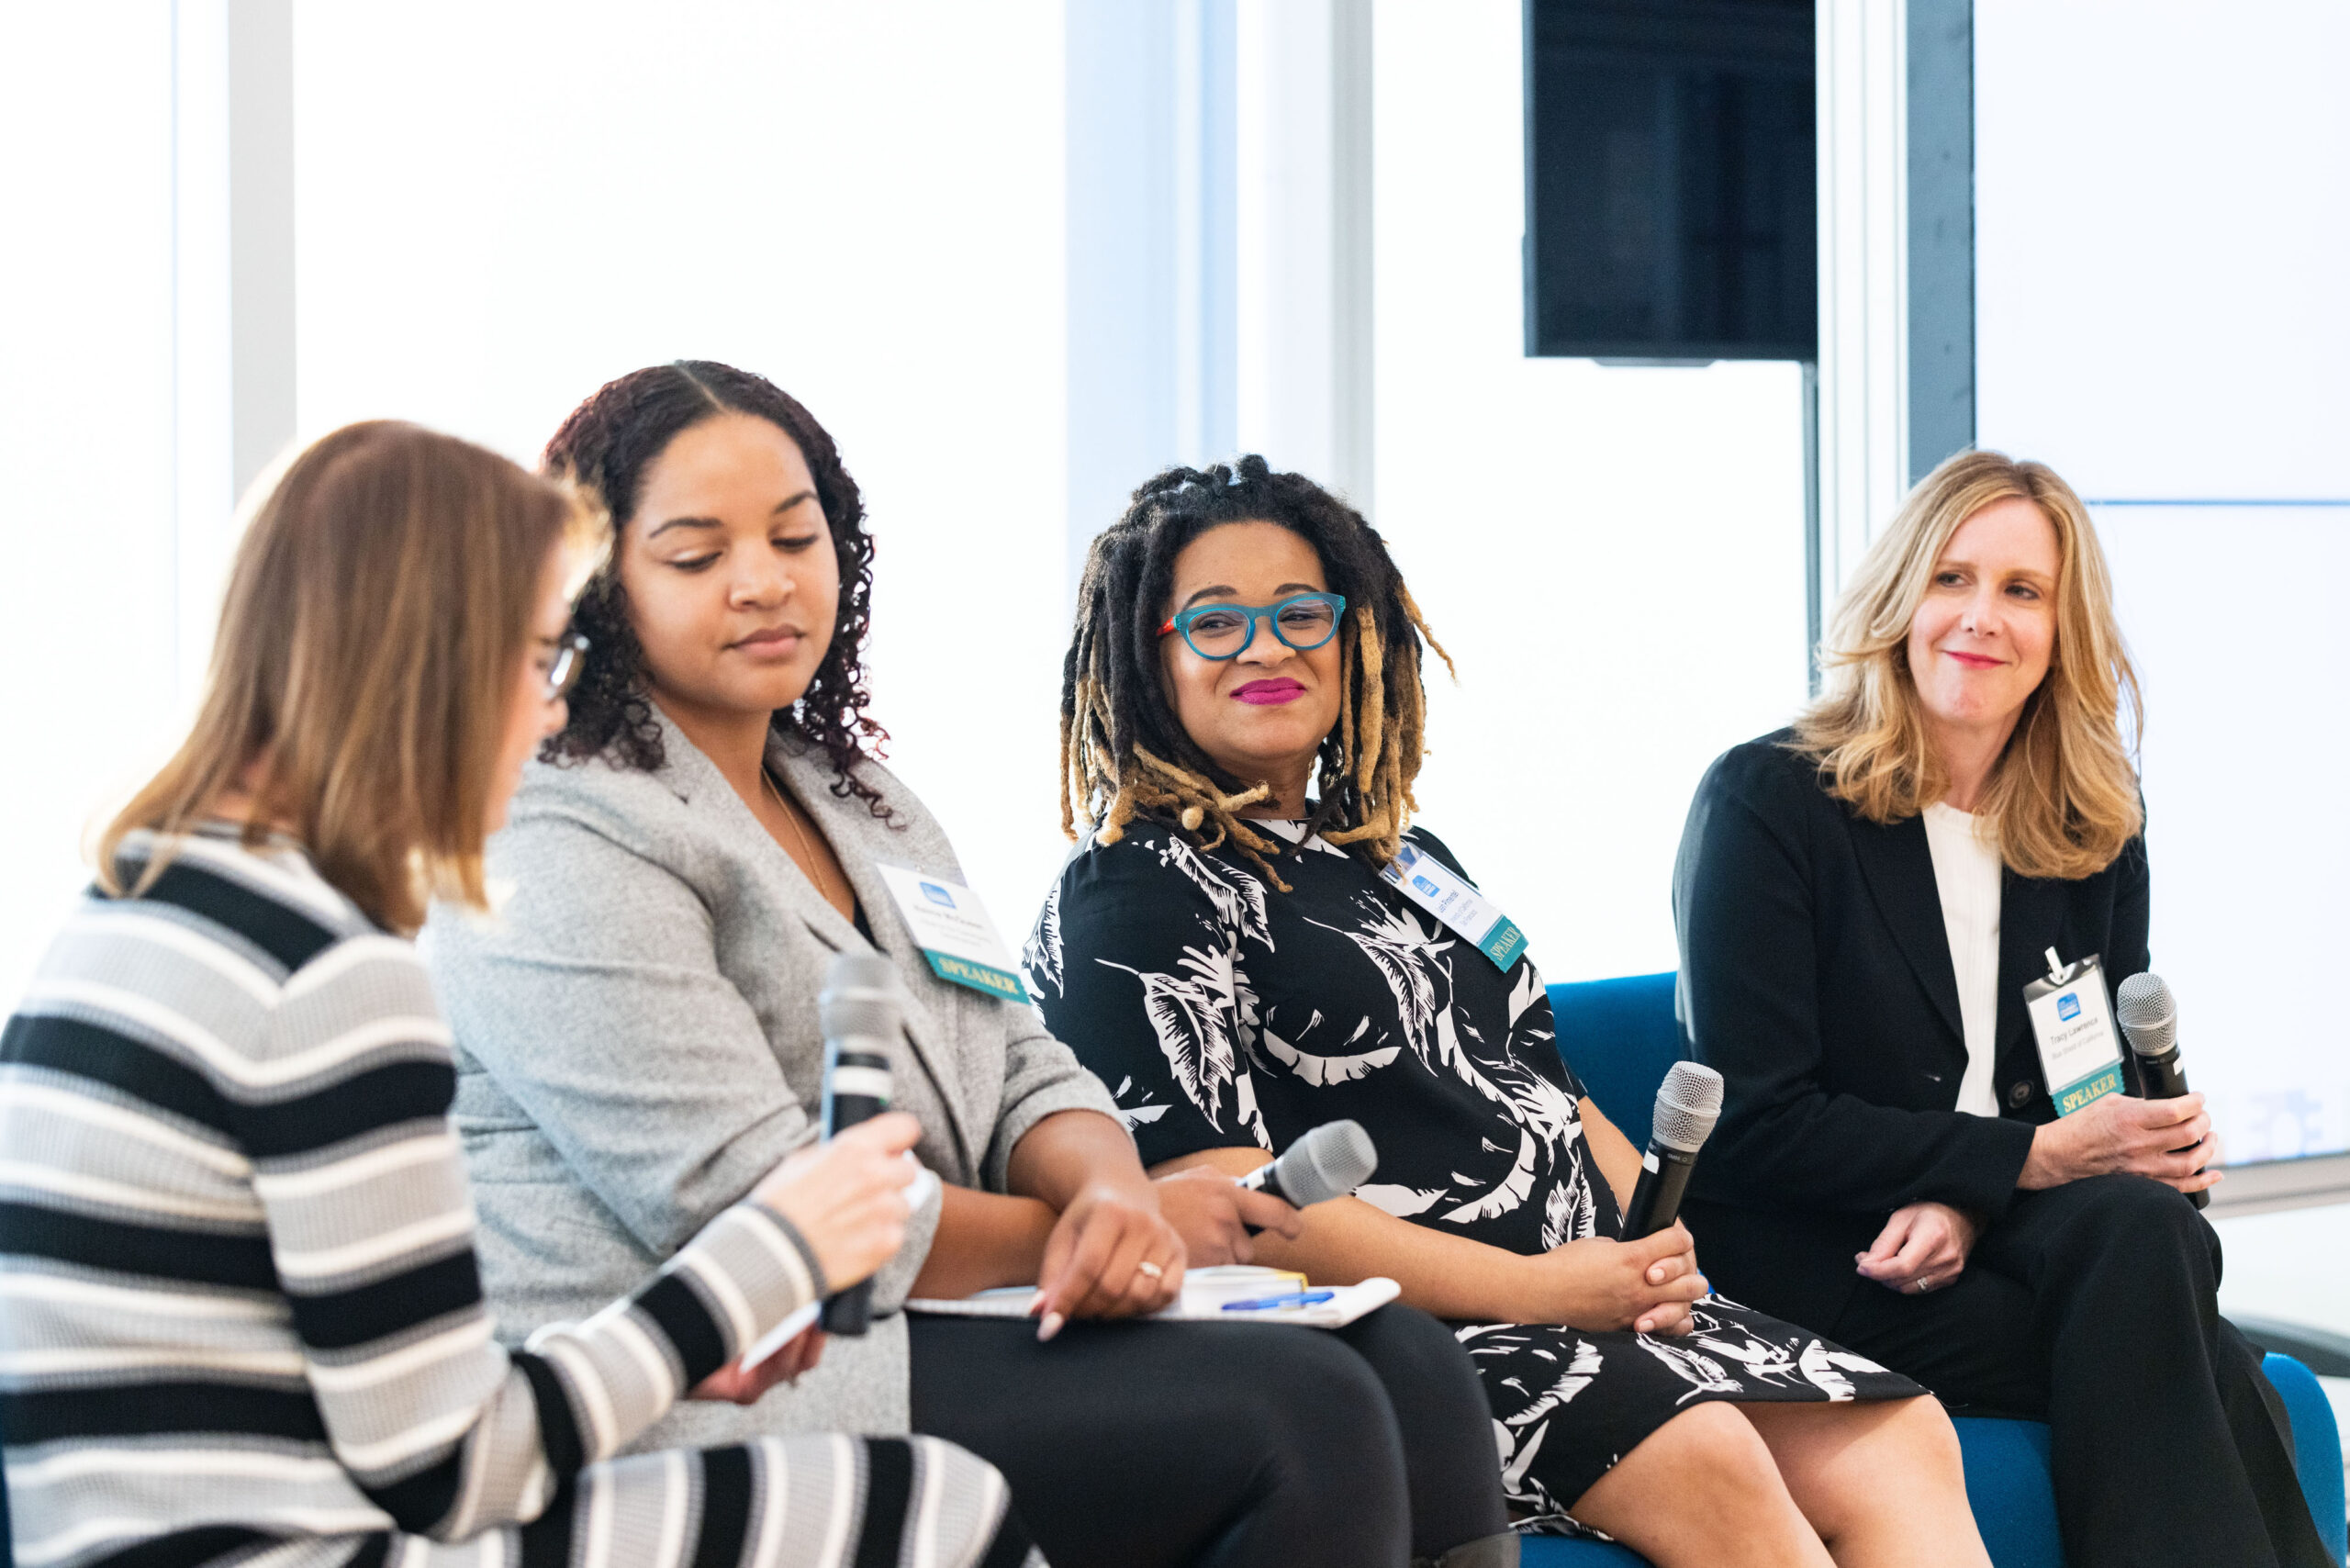 SAN FRANCISCO, CA - October 20 - Katy Brown, Naima McQueen, Leah Pimentel and Tracy Lawrence attend SFCC hosts Well Conference in Salesforce Tower on Thursday, October 20th on October 20th 2022 at Salesforce Tower in San Francisco, CA (Photo - Katie Ravas for Drew Altizer Photography)